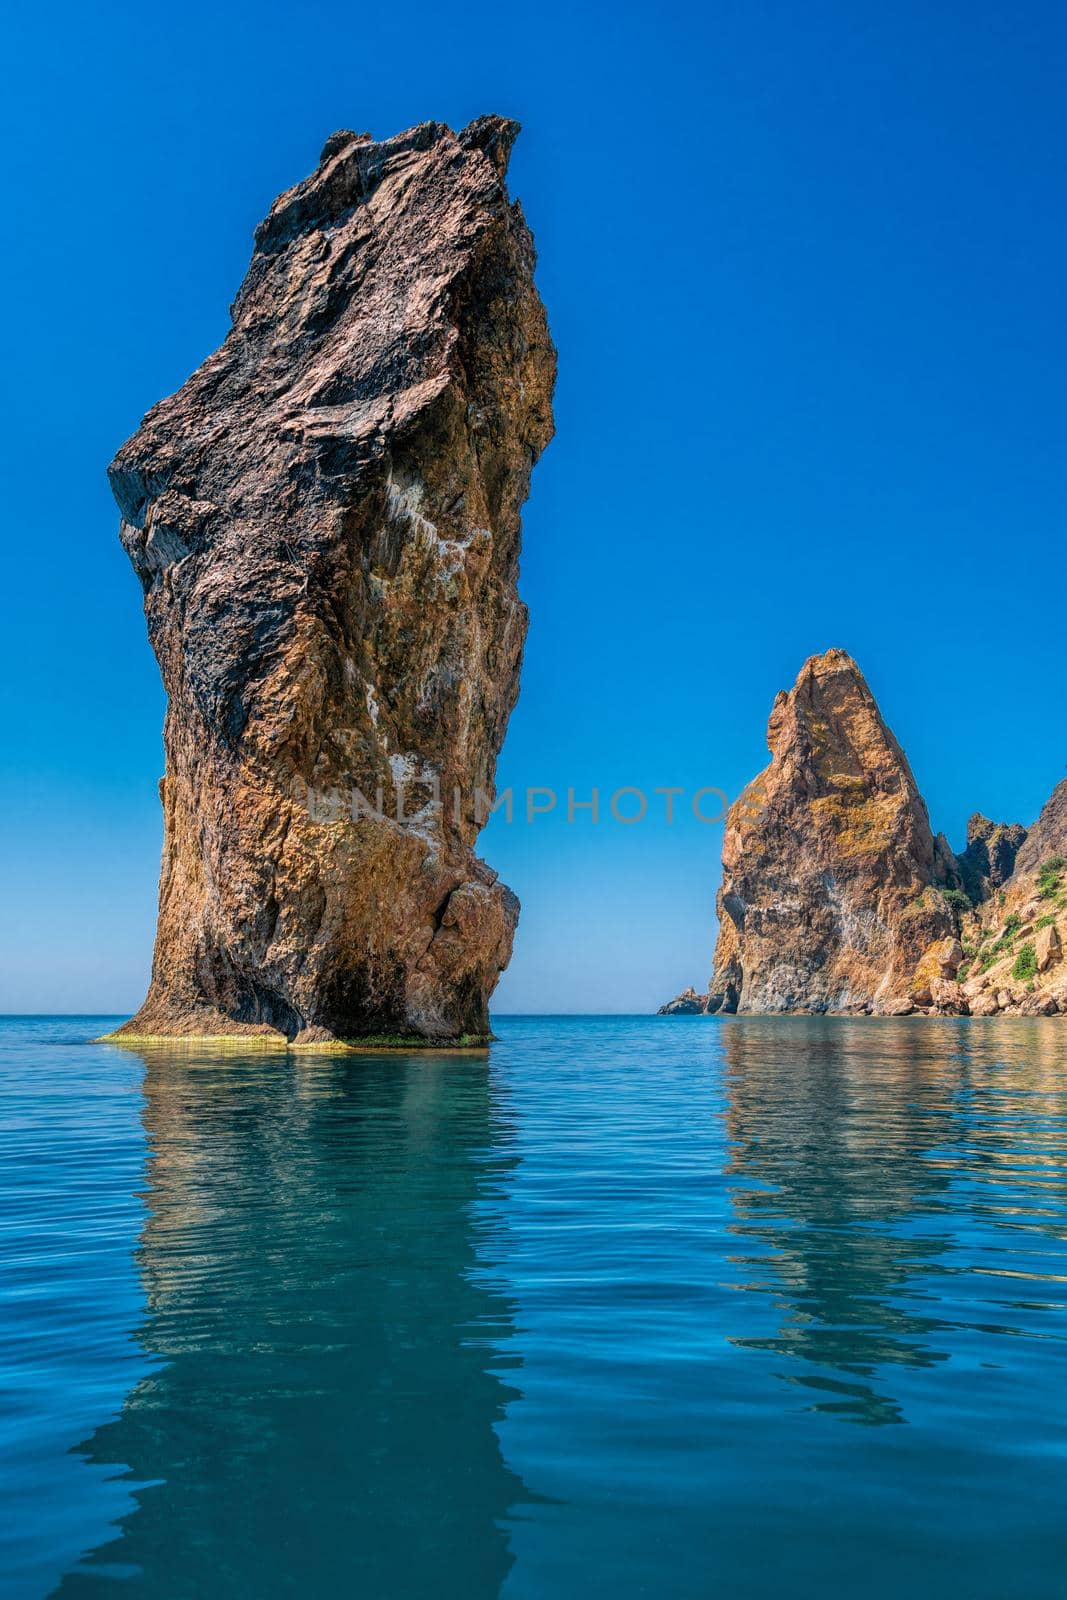 view on coastal cliffs, rock Orest and Pilad, cape Fiolent in Balaklava, Sevastopol Crimea. Bright sunny day, calm cristal clear blue sea. The concept of calmness silence and unity with nature